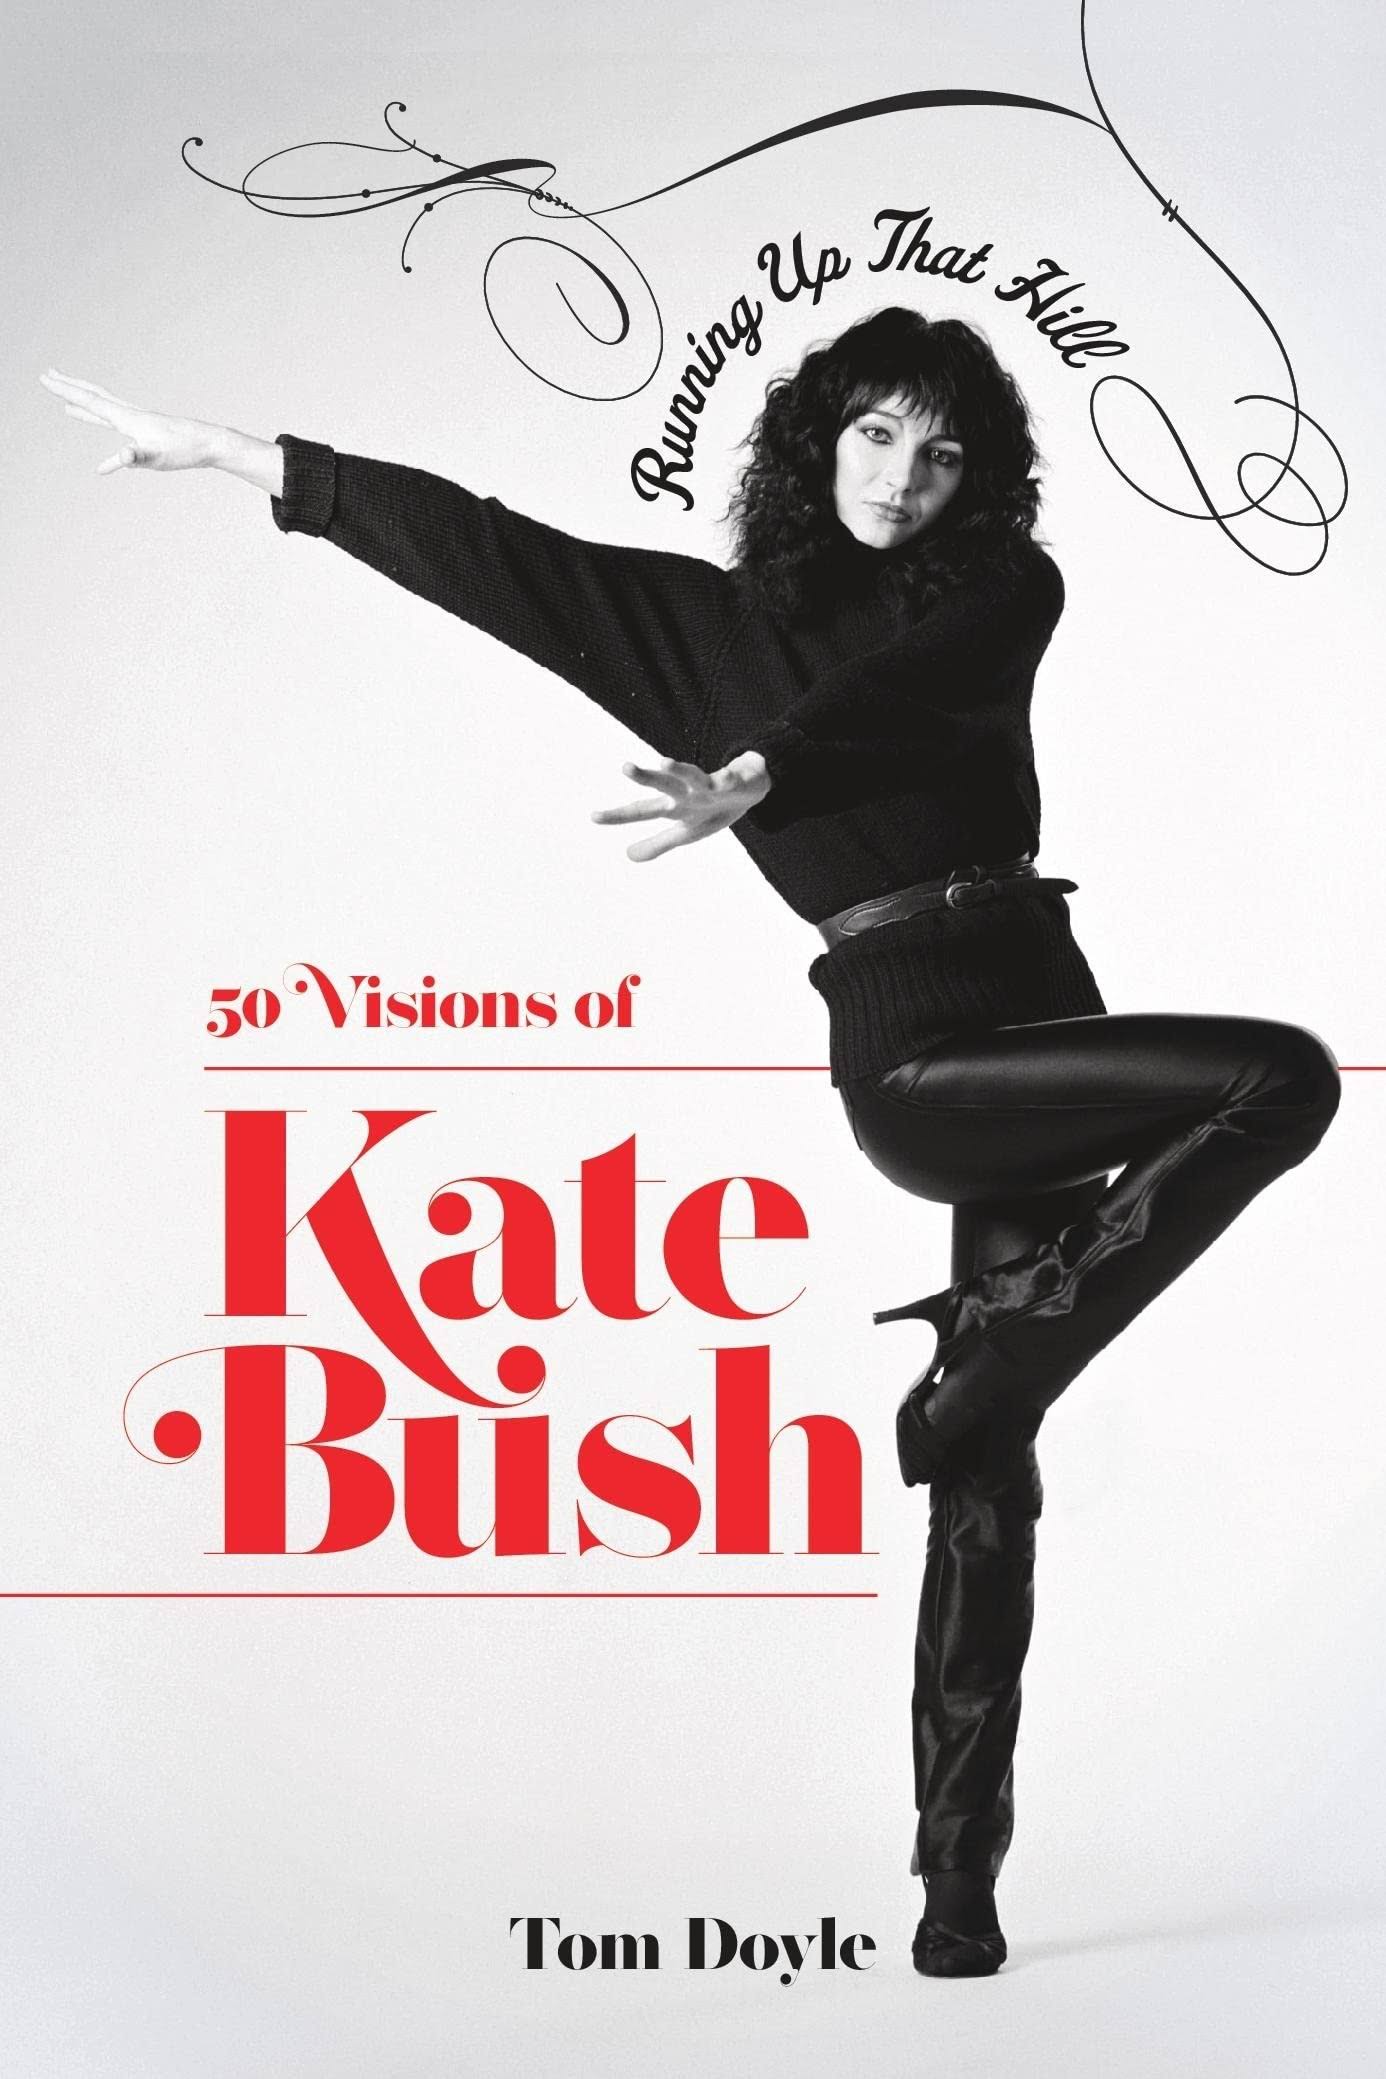 Running Up That Hill: 50 Visions of Kate Bush [Book]